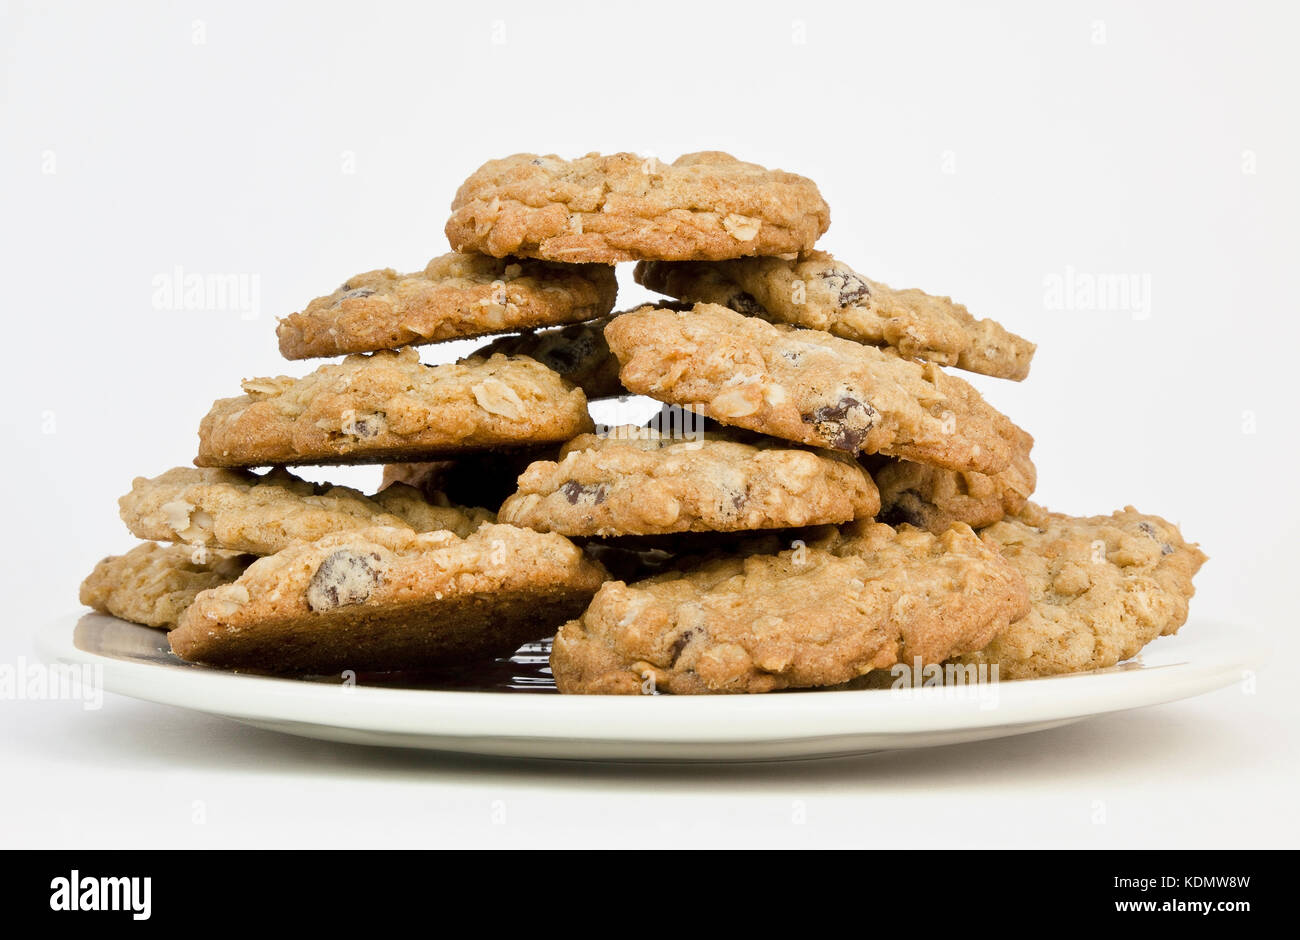 Front view of a plate piled high with homemade oatmeal raisin chocolate chip biscuits cookies on a white background. Stock Photo